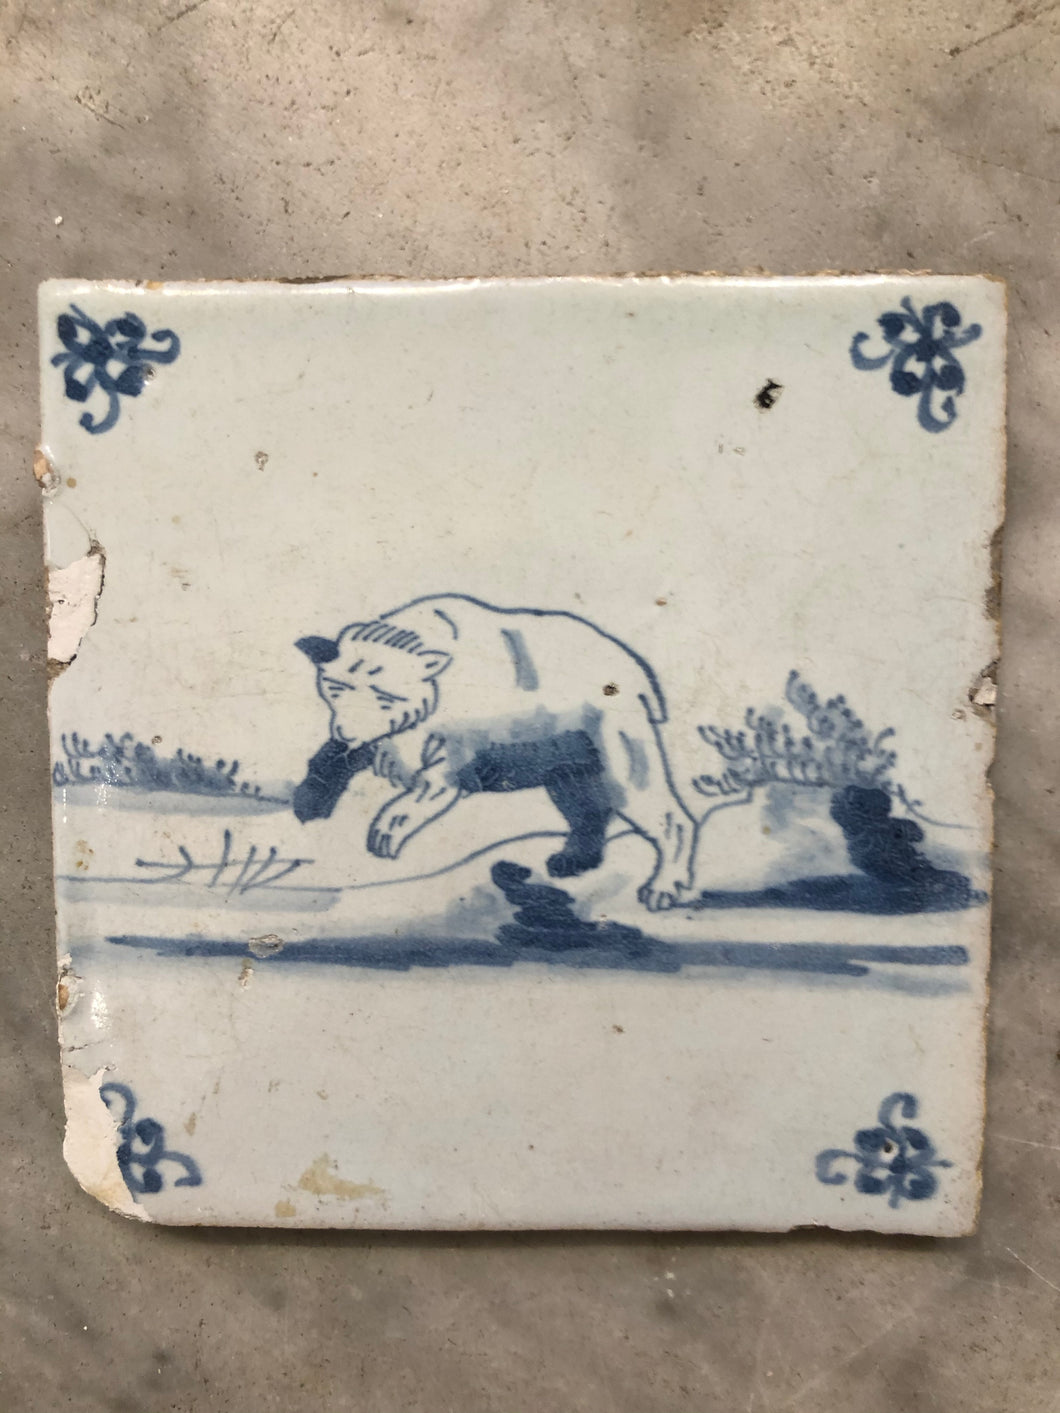 17th century delft tile with bear